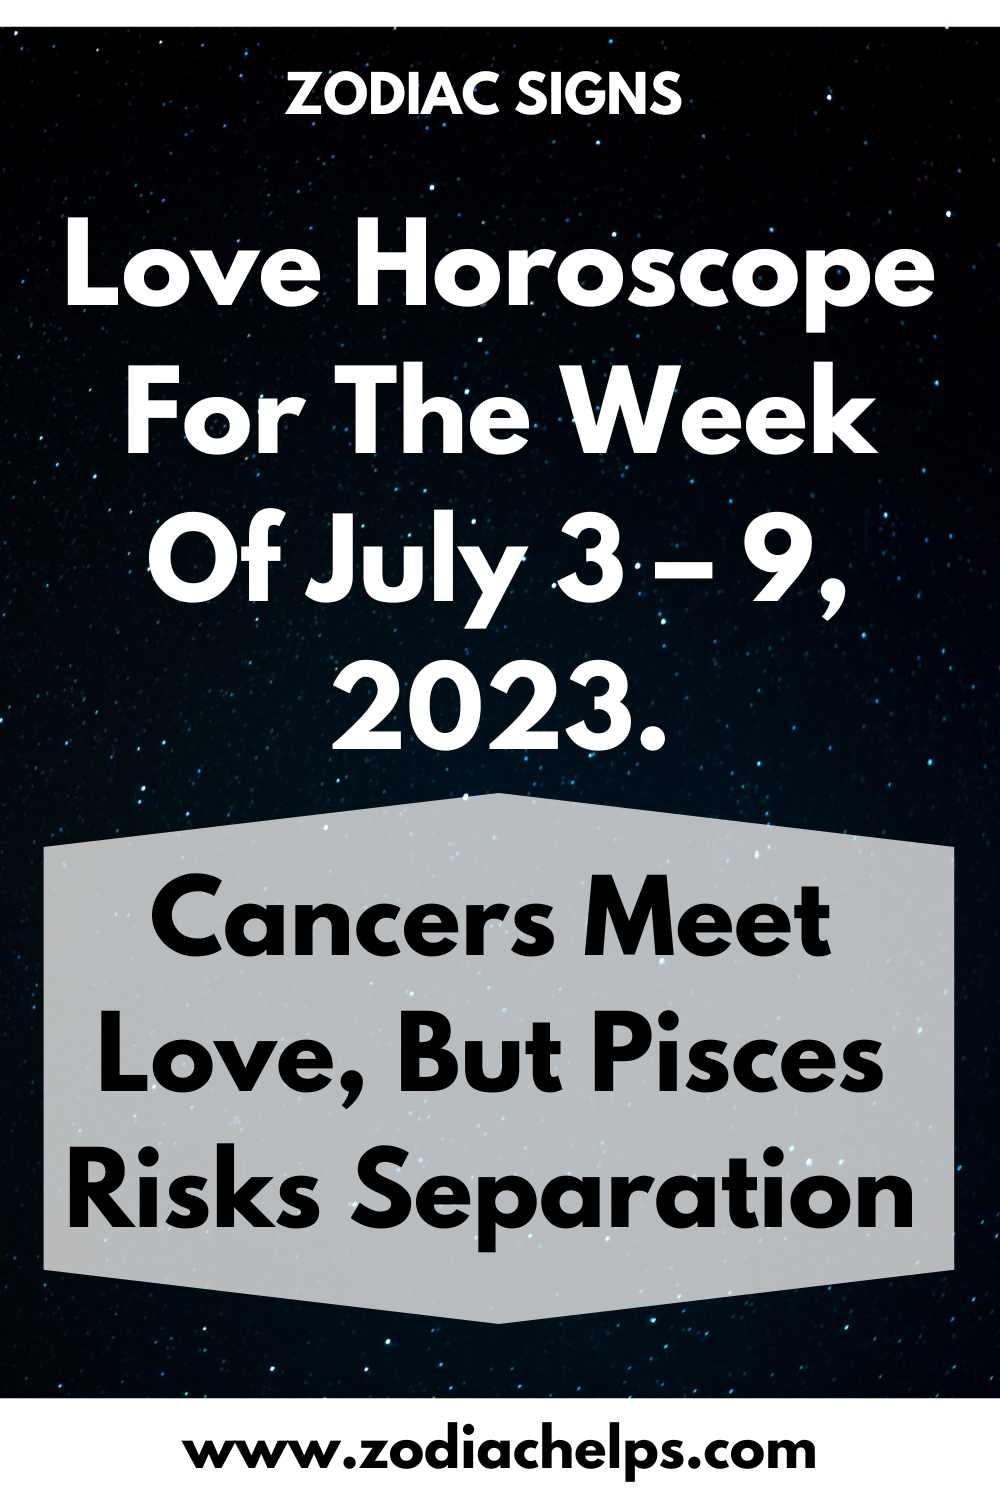 Love Horoscope For The Week Of July 3 – 9, 2023. Cancers Meet Love, But Pisces Risks Separation